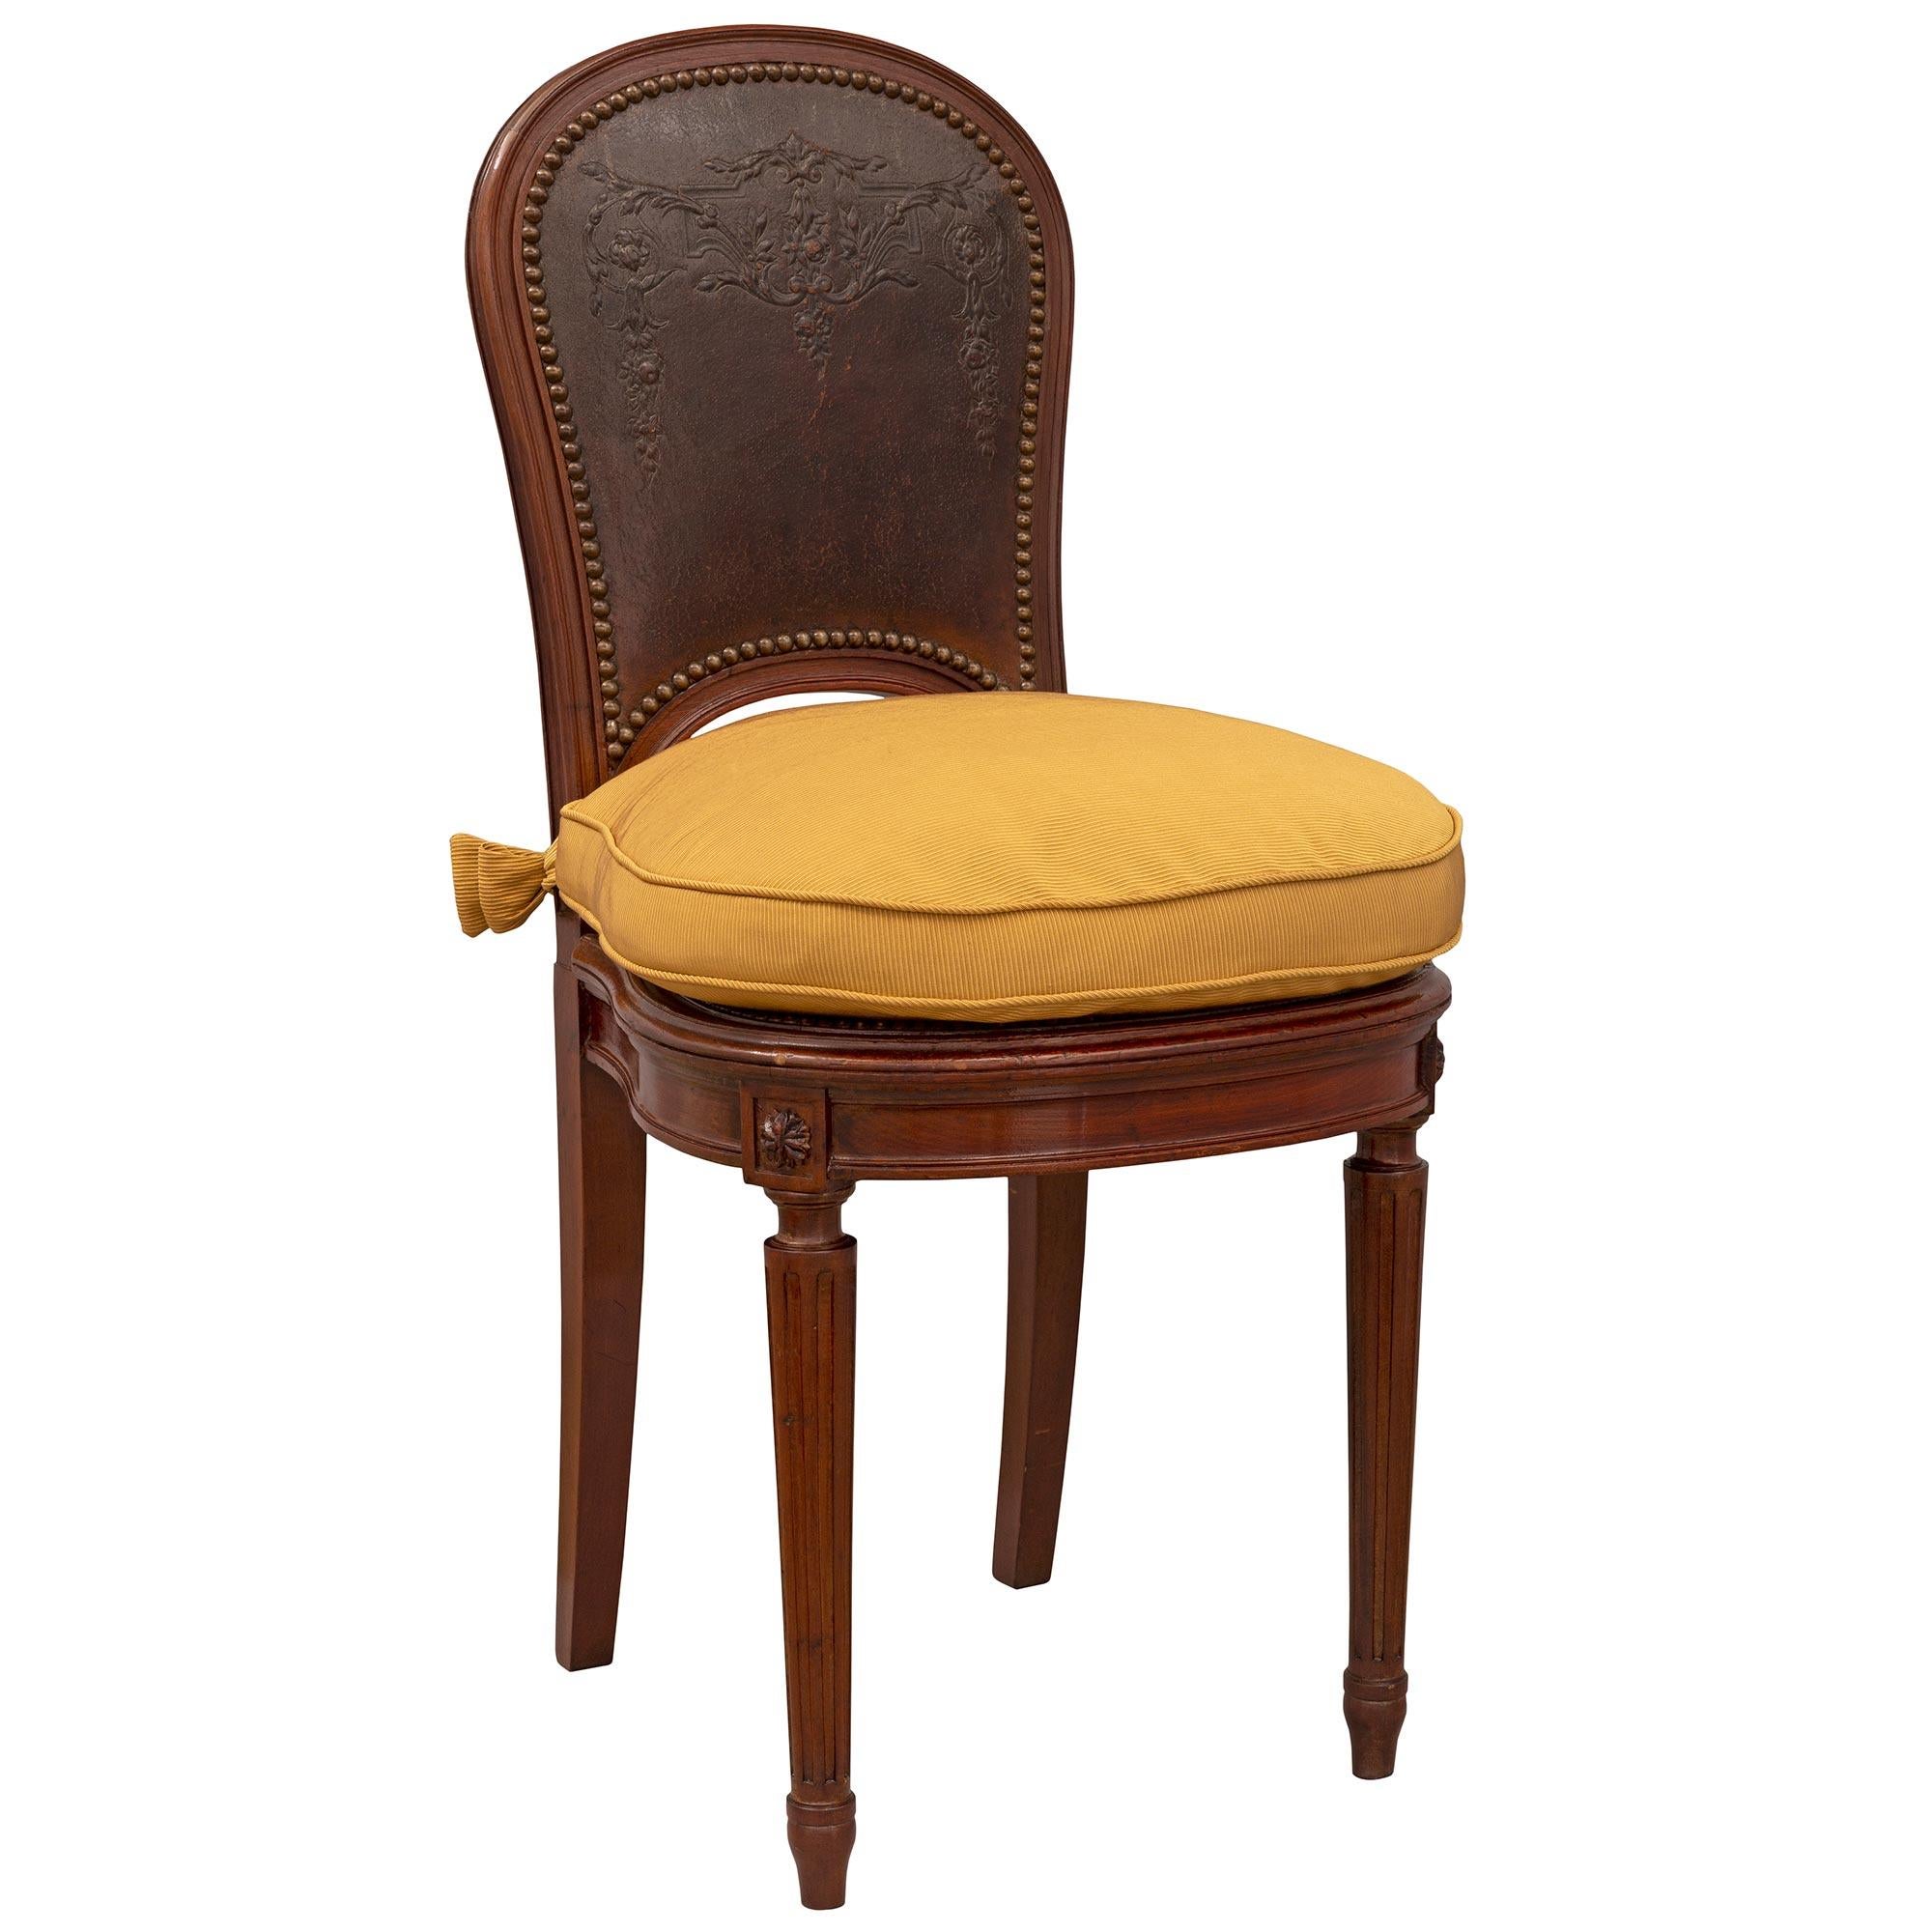 A most attractive complete set of eight French 19th century Louis XVI st. mahogany and pressed leather chairs. Each chair is raised by elegant circular fluted tapered legs with fine topie shaped feet. Above each leg are richly carved block rosettes